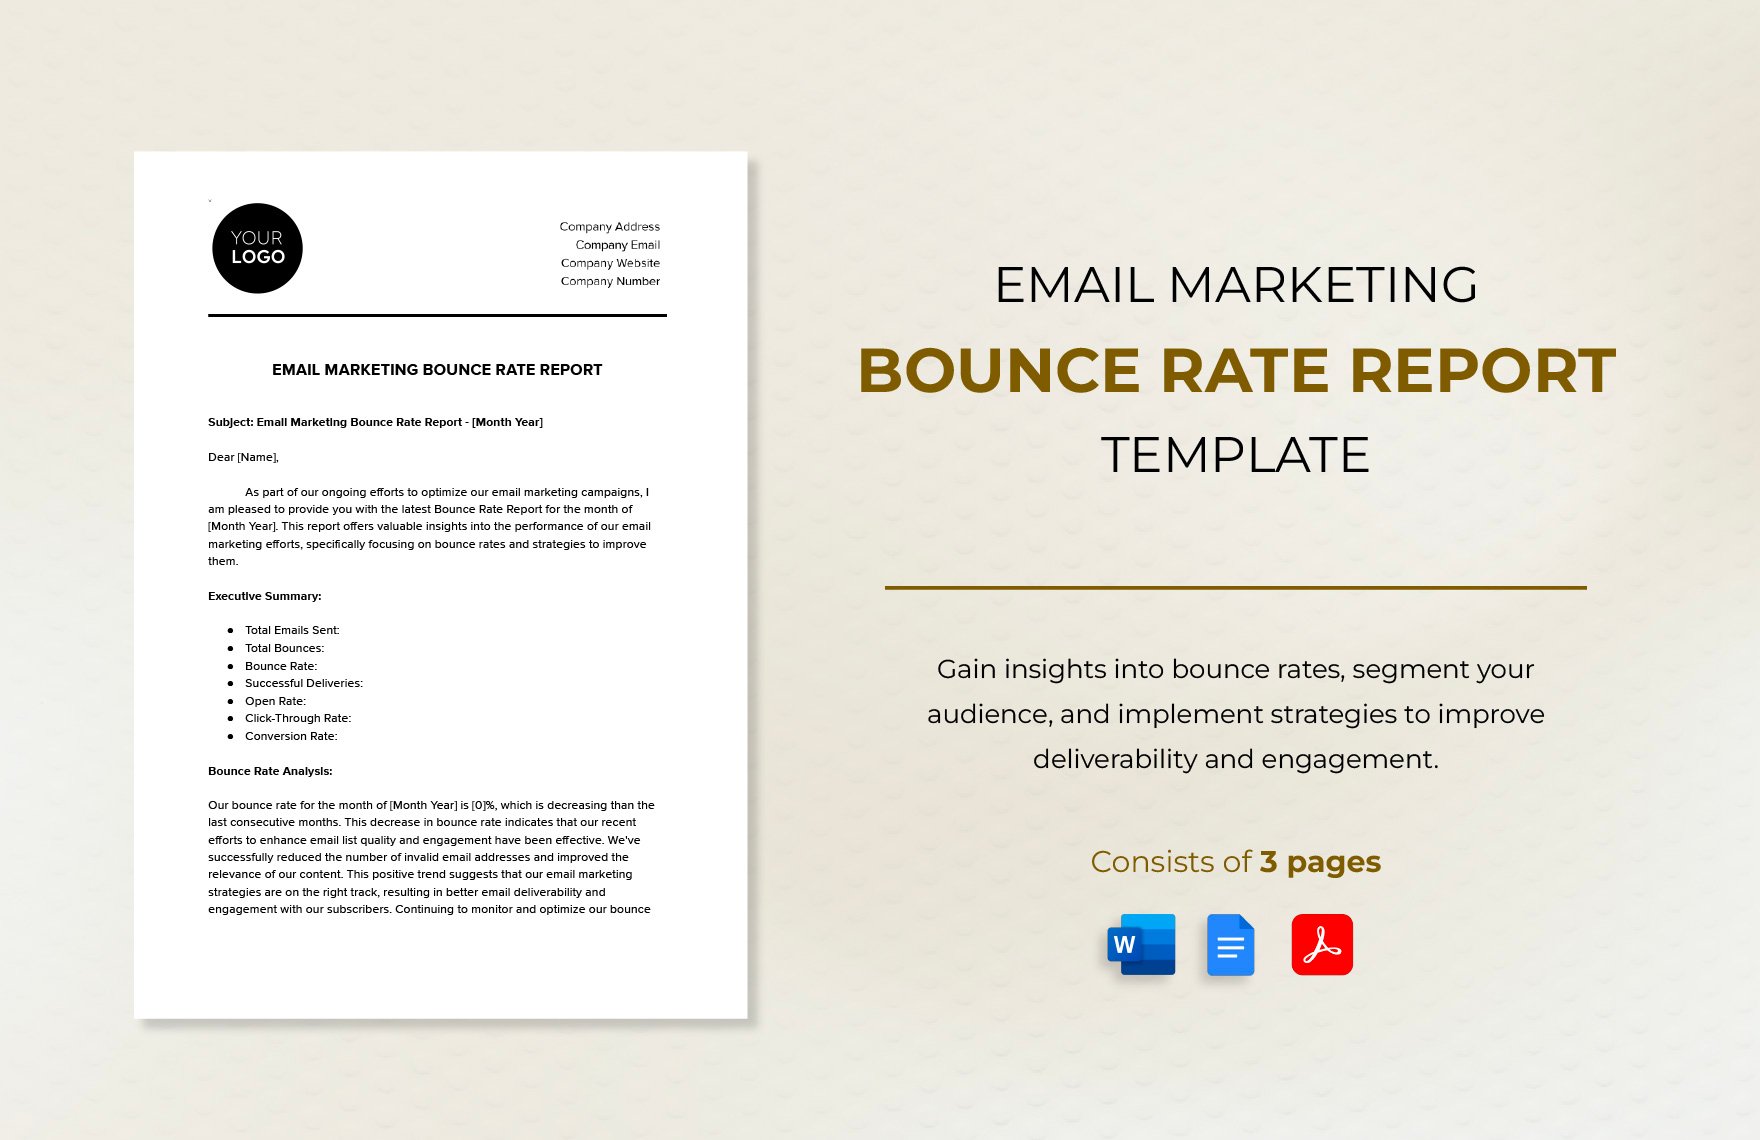 Email Marketing Bounce Rate Report Template